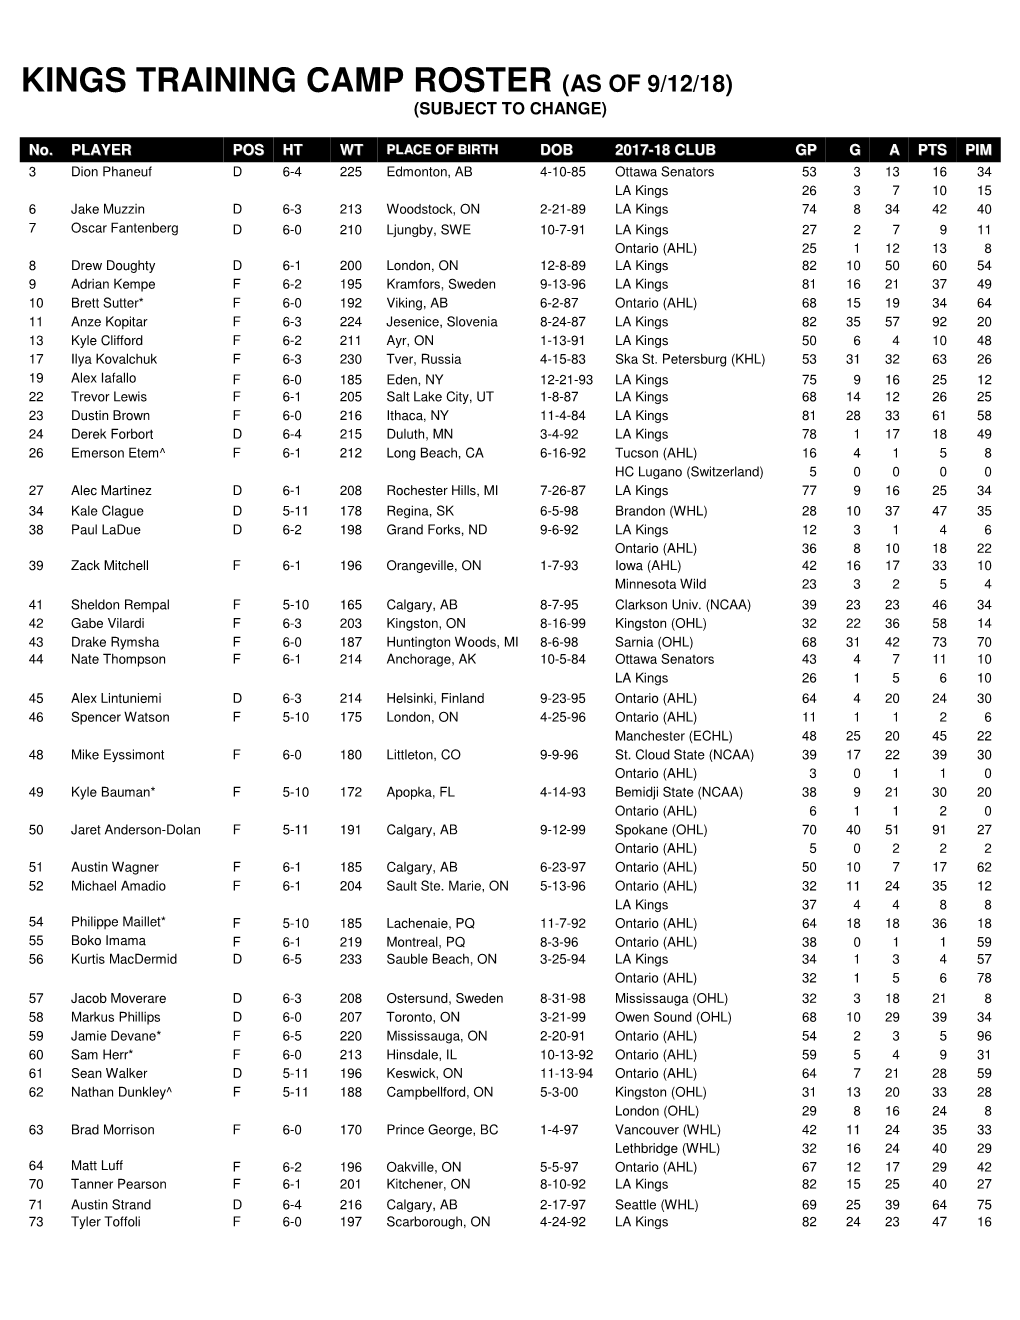 Kings Training Camp Roster (As of 9/12/18) (Subject to Change)